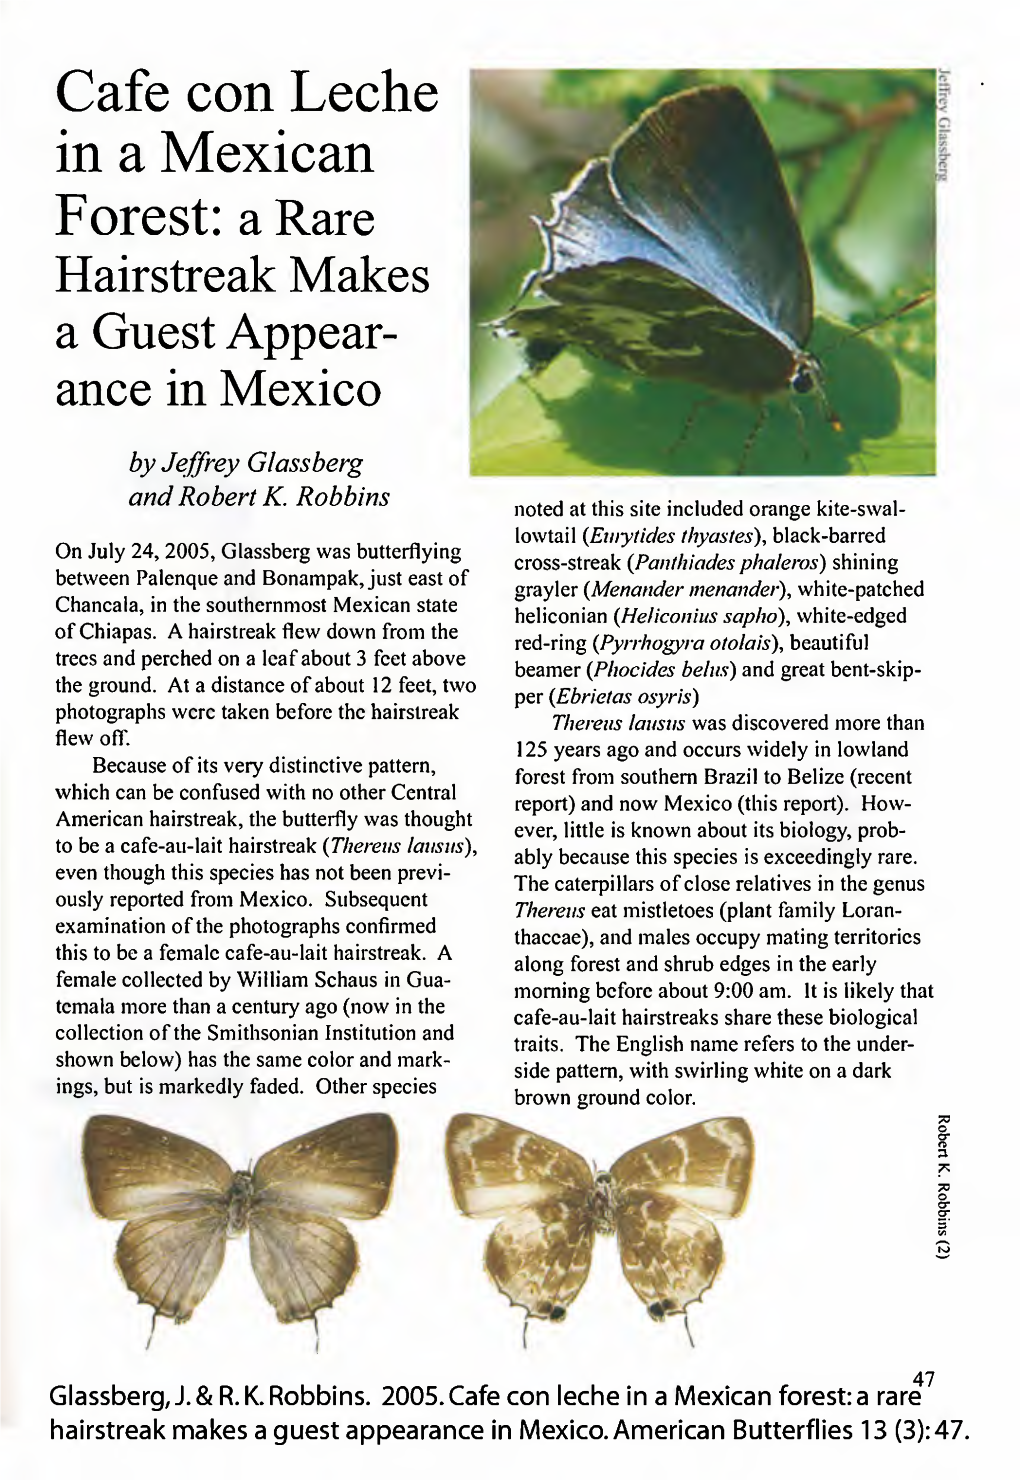 Cafe Con Leche in a Mexican Forest: a Rare Hairstreak Makes a Guest Appear- Ance in Mexico